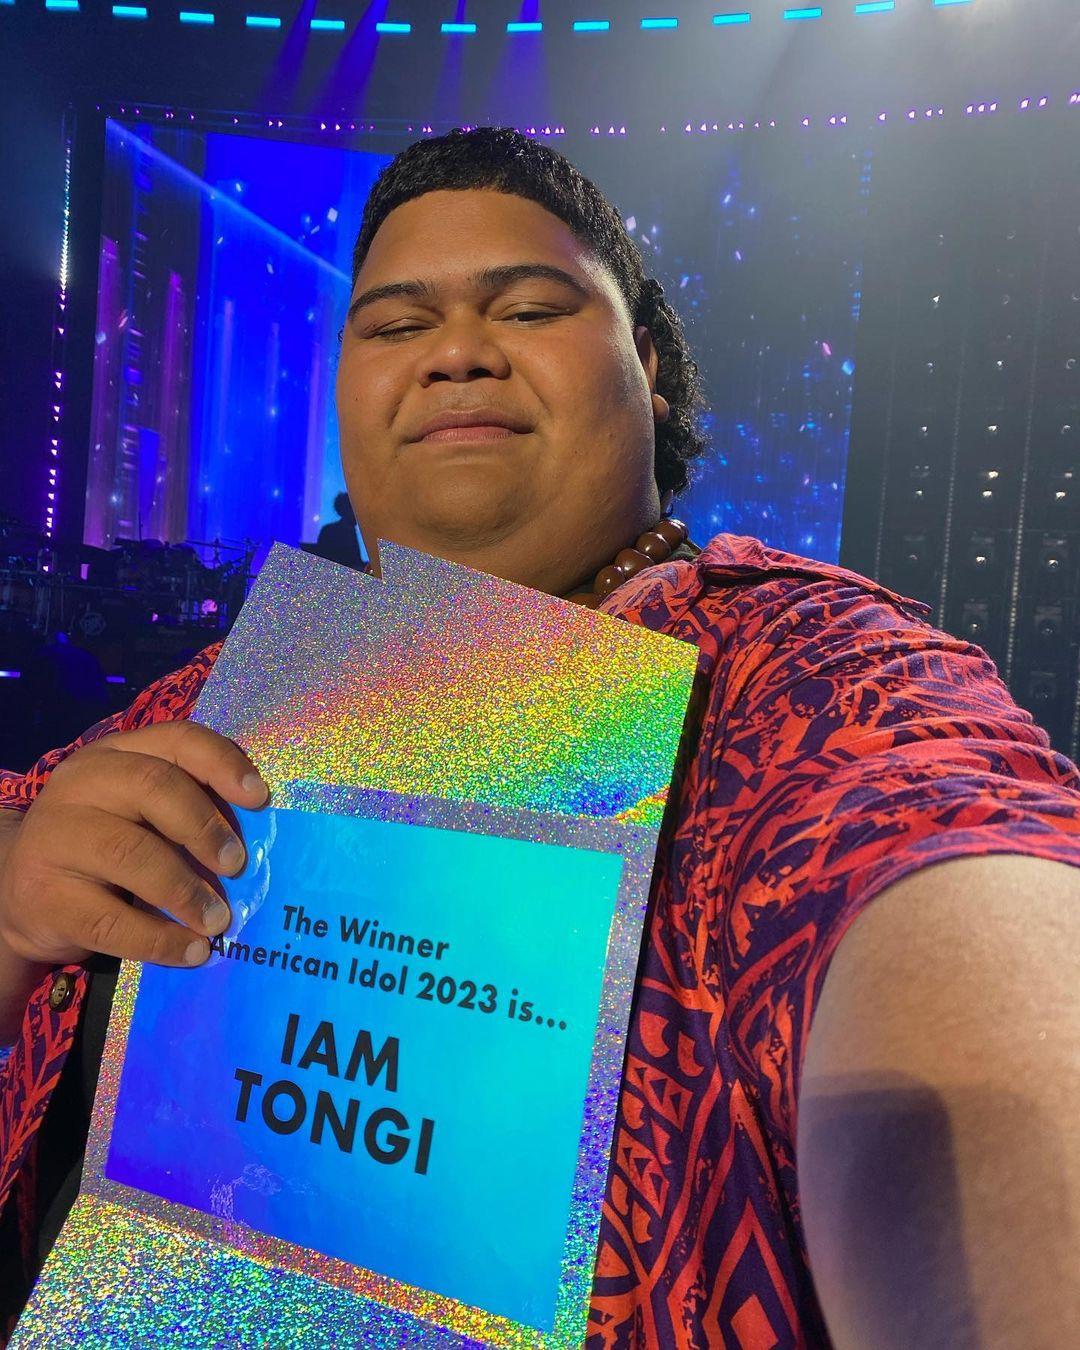 american idol iam tongi holding announcement at finale